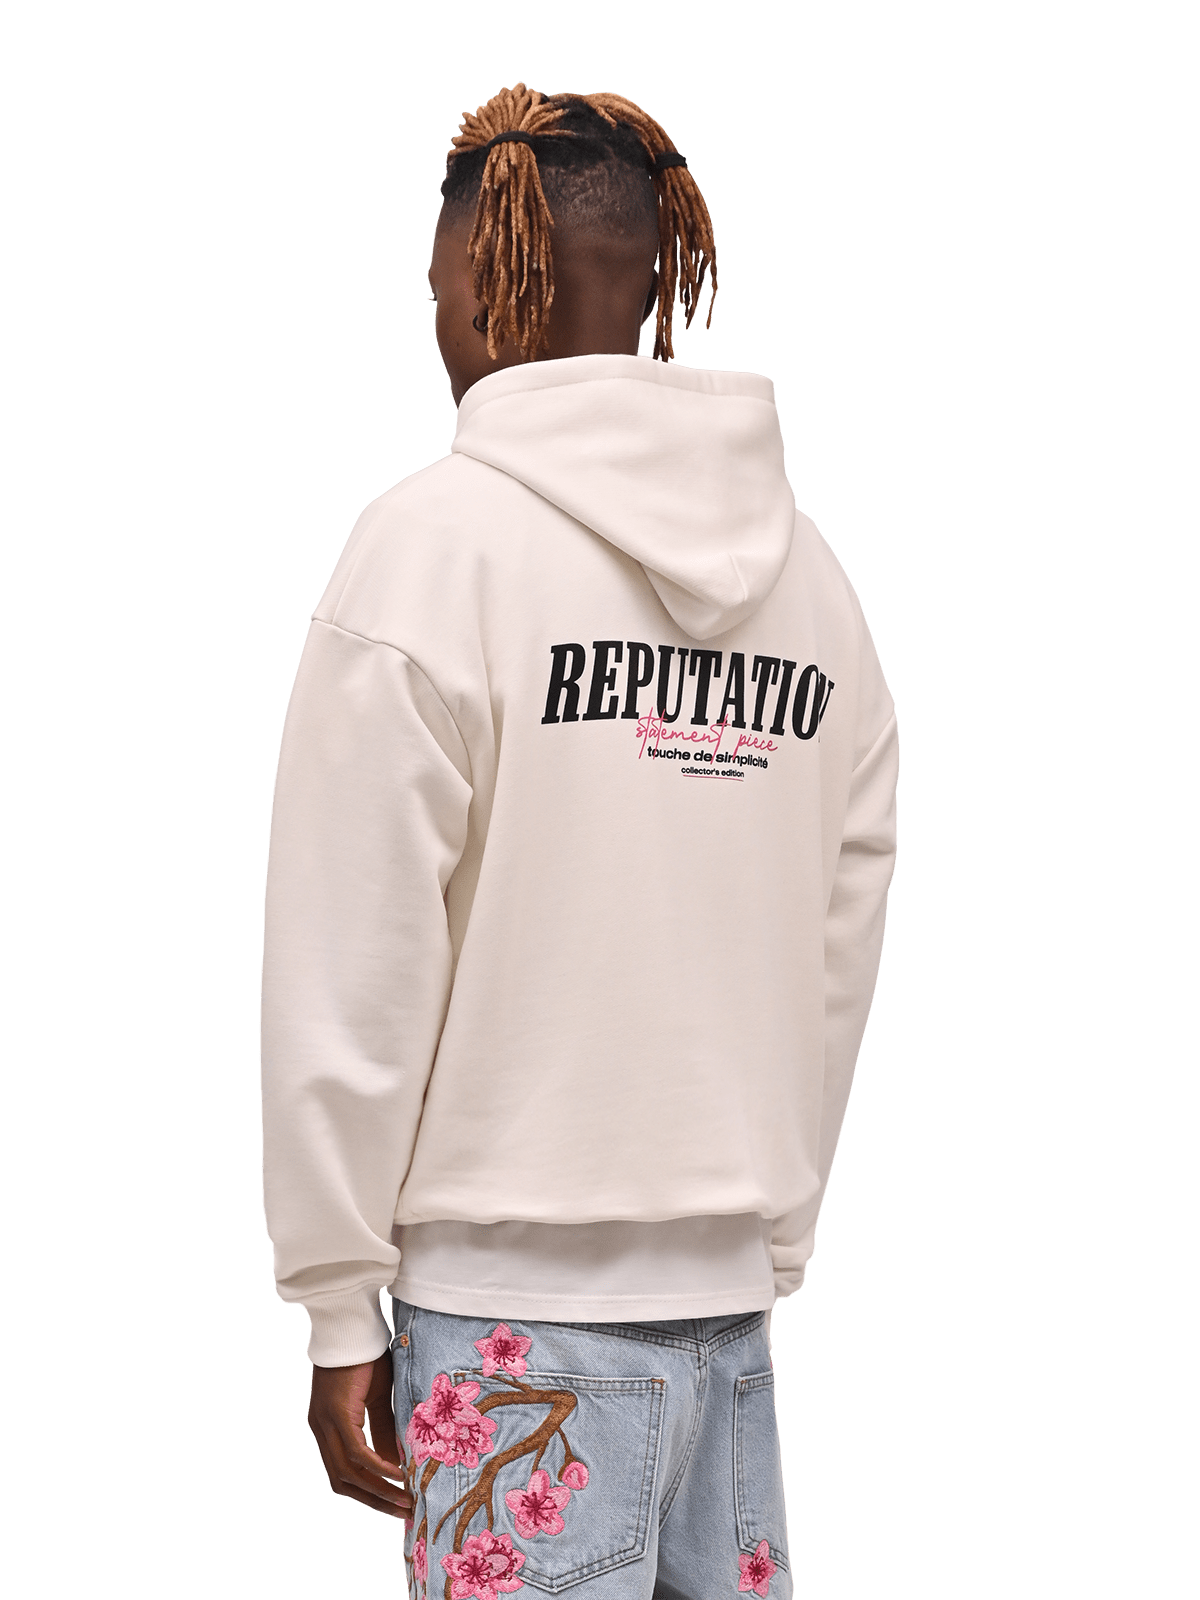 Limited Edition "Statement Piece" Hoodie - Off White